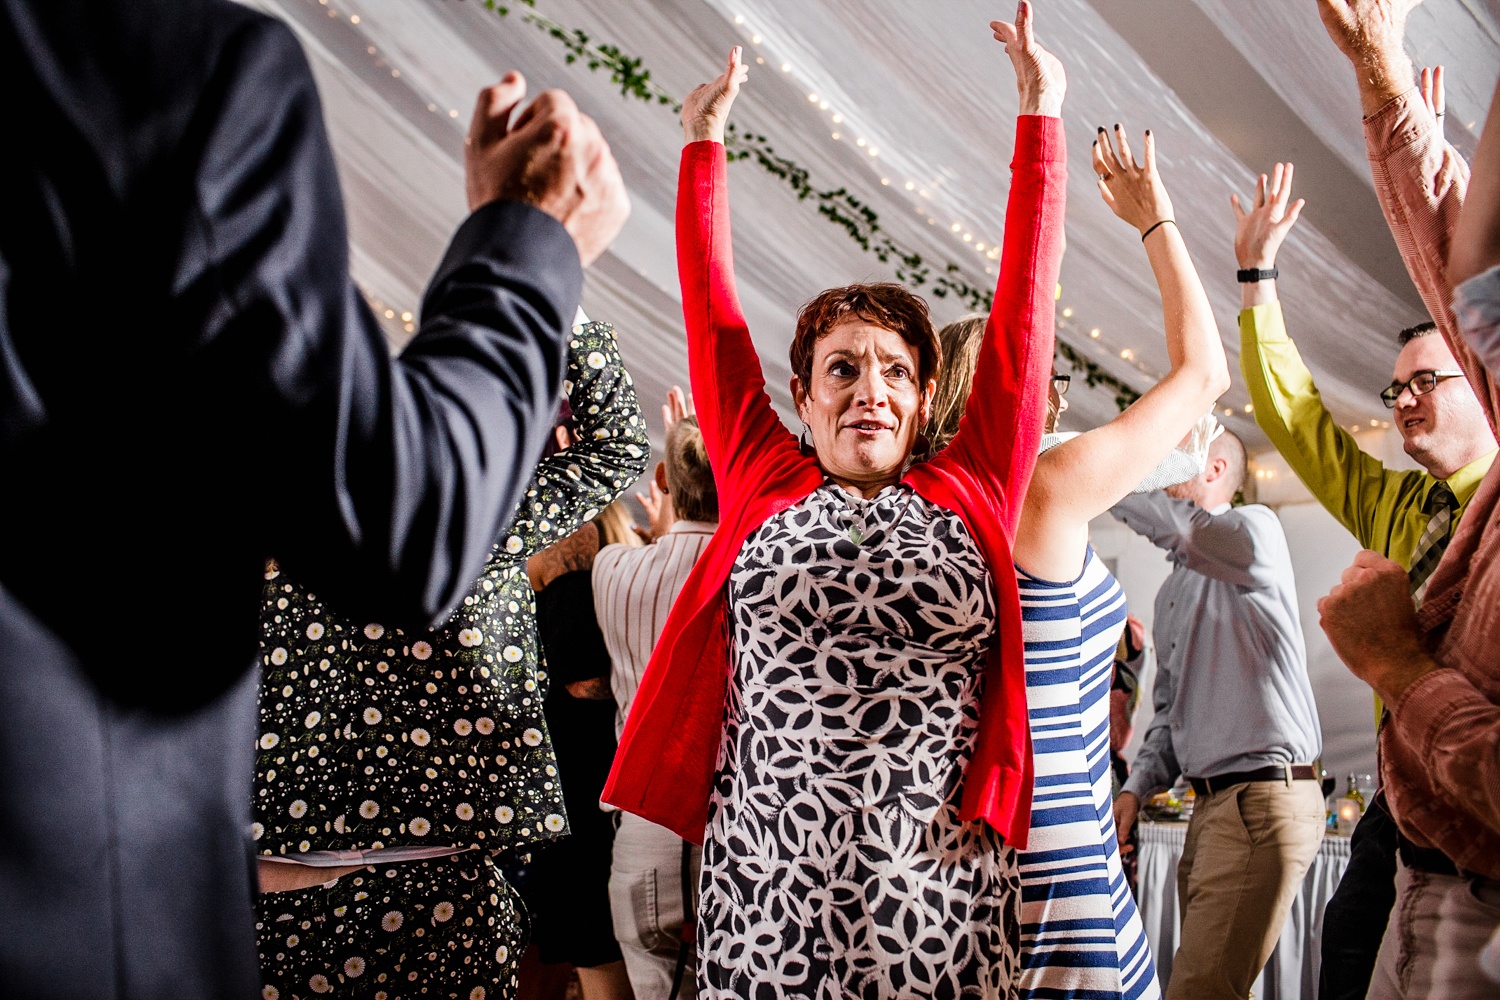 Guests dance together at an Illinois Beach Resort wedding reception